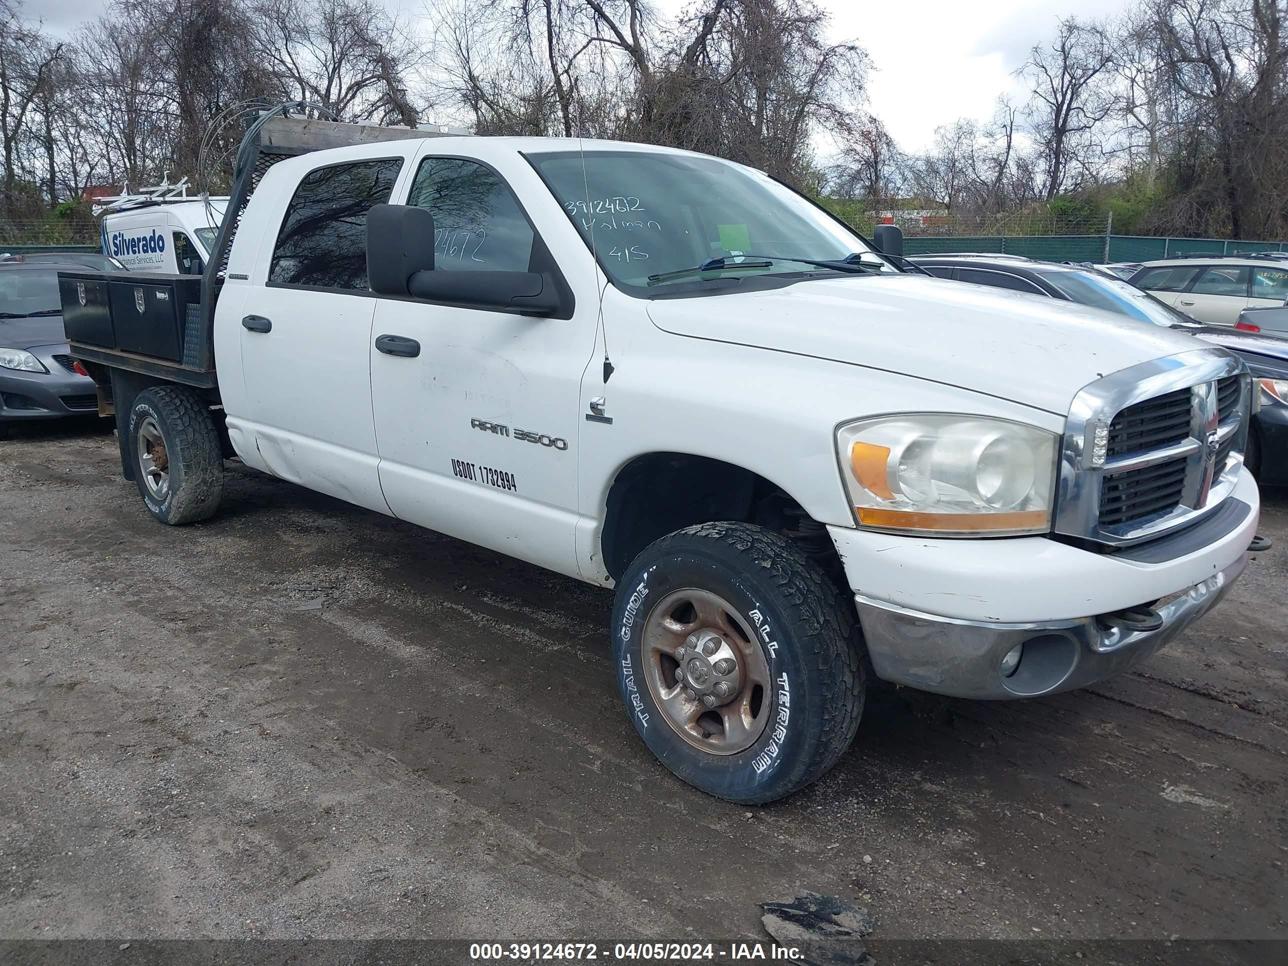 vin: 3D7LX39C56G210899 3D7LX39C56G210899 2006 dodge ram 5900 for Sale in 21226, 3131 Hawkins Point Road, Baltimore, Maryland, USA